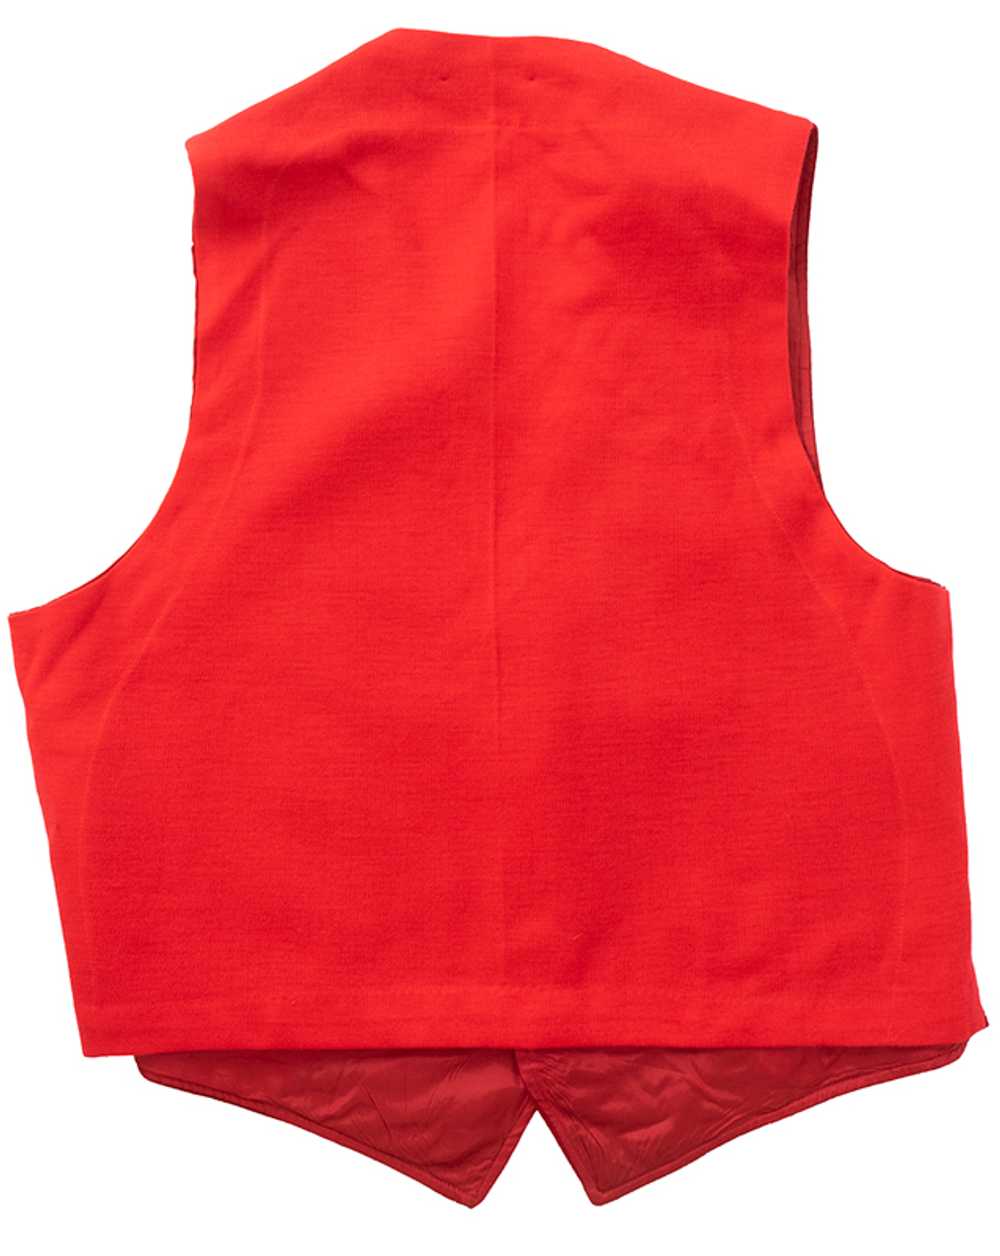 1960s Red Wool Vest - image 2